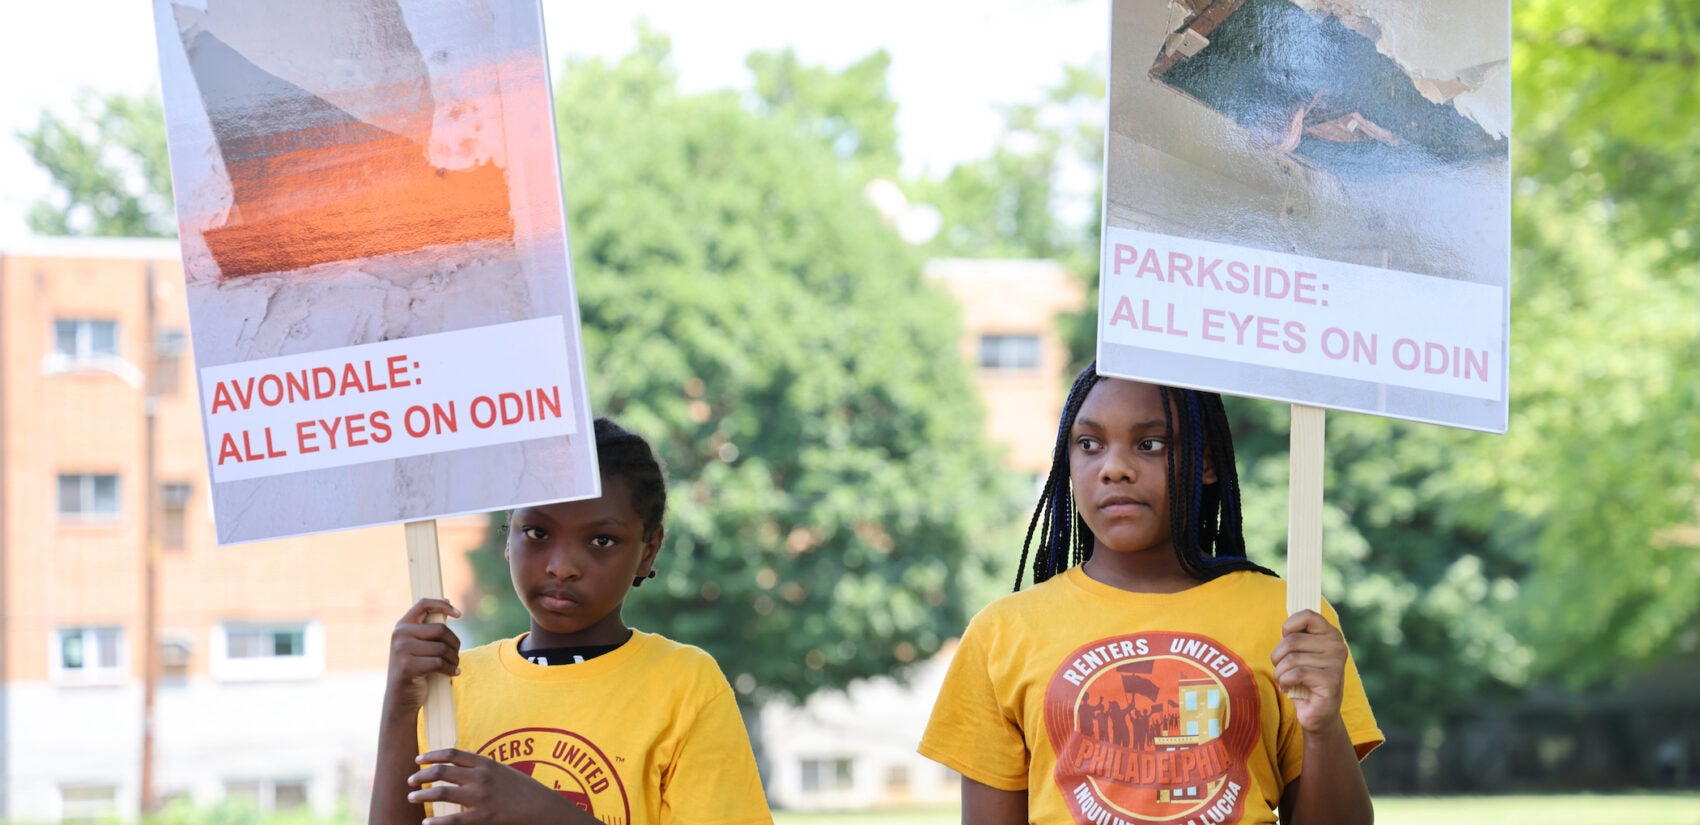 two children carry signs reading Avondale: All Eyes on Odin and Parkside: All Eyes on Odin